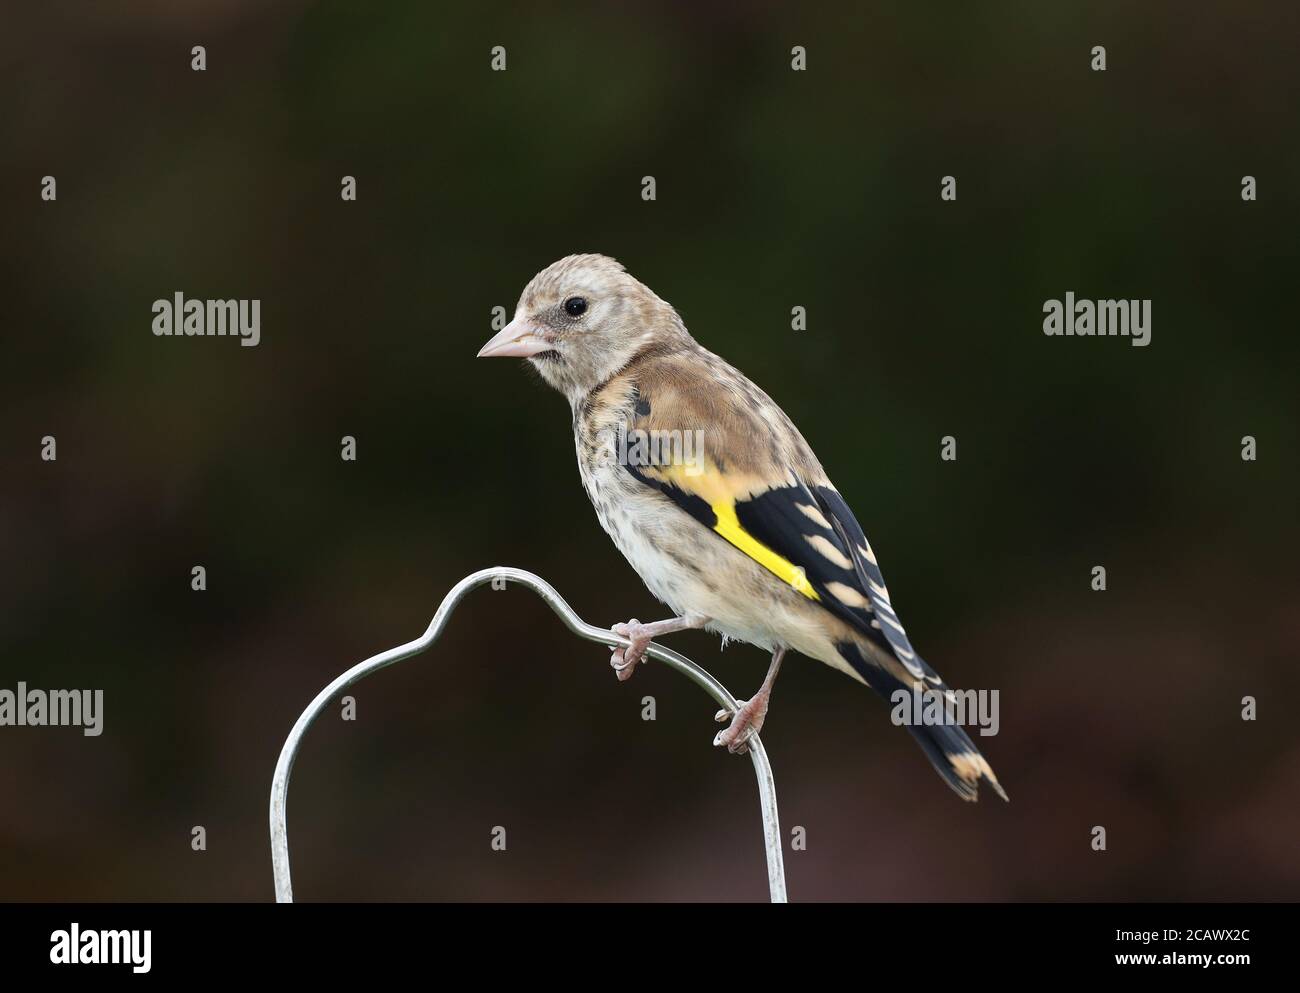 Juvenile Goldfinch, Carduelis carduelis, at a garden feeder, Mid Wales, uk Stock Photo